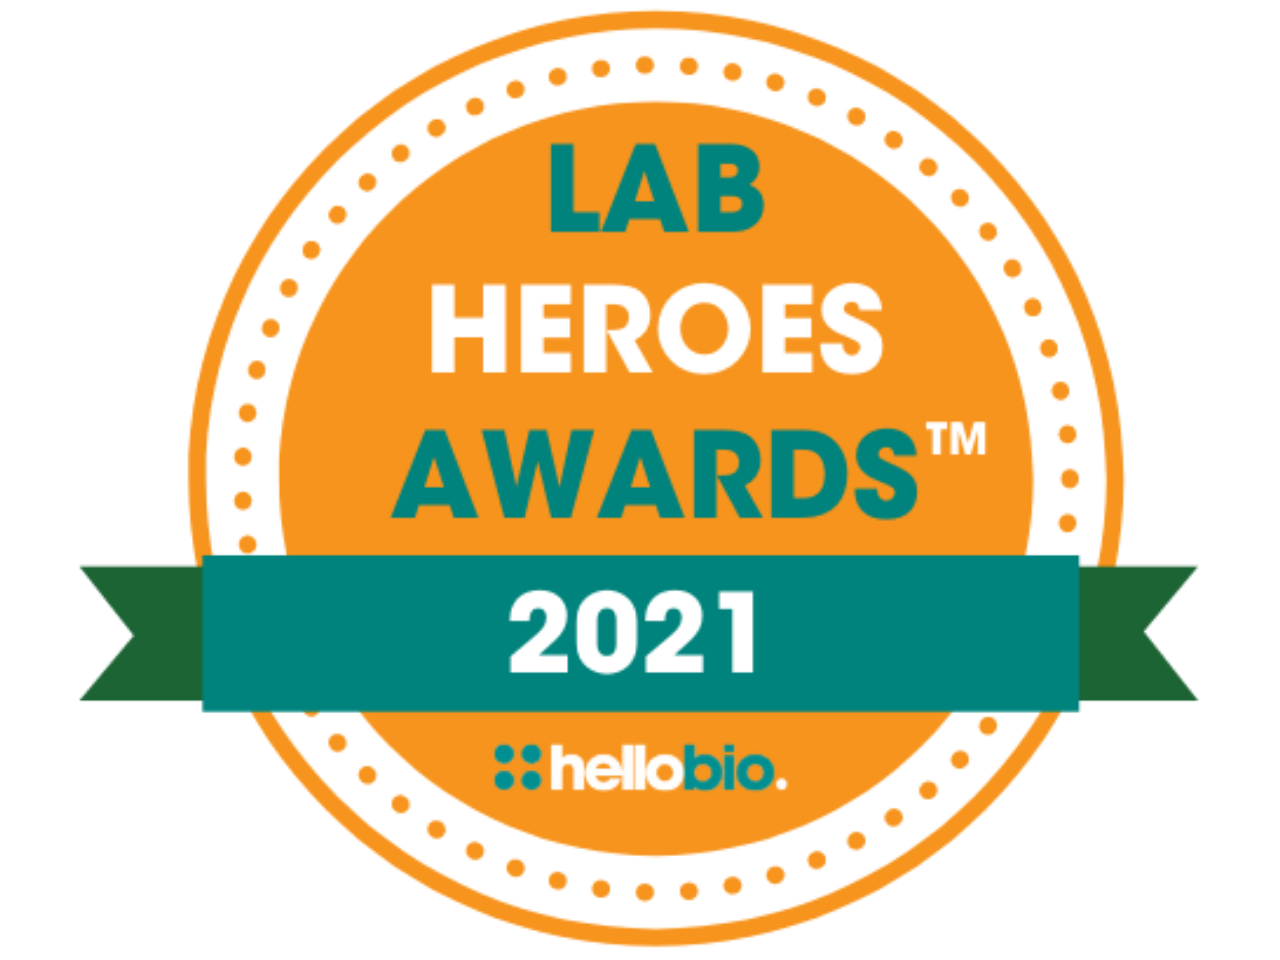 Lab Heroes Awards™ 2021 Are Now Open, Celebrating Life Scientists Worldwide